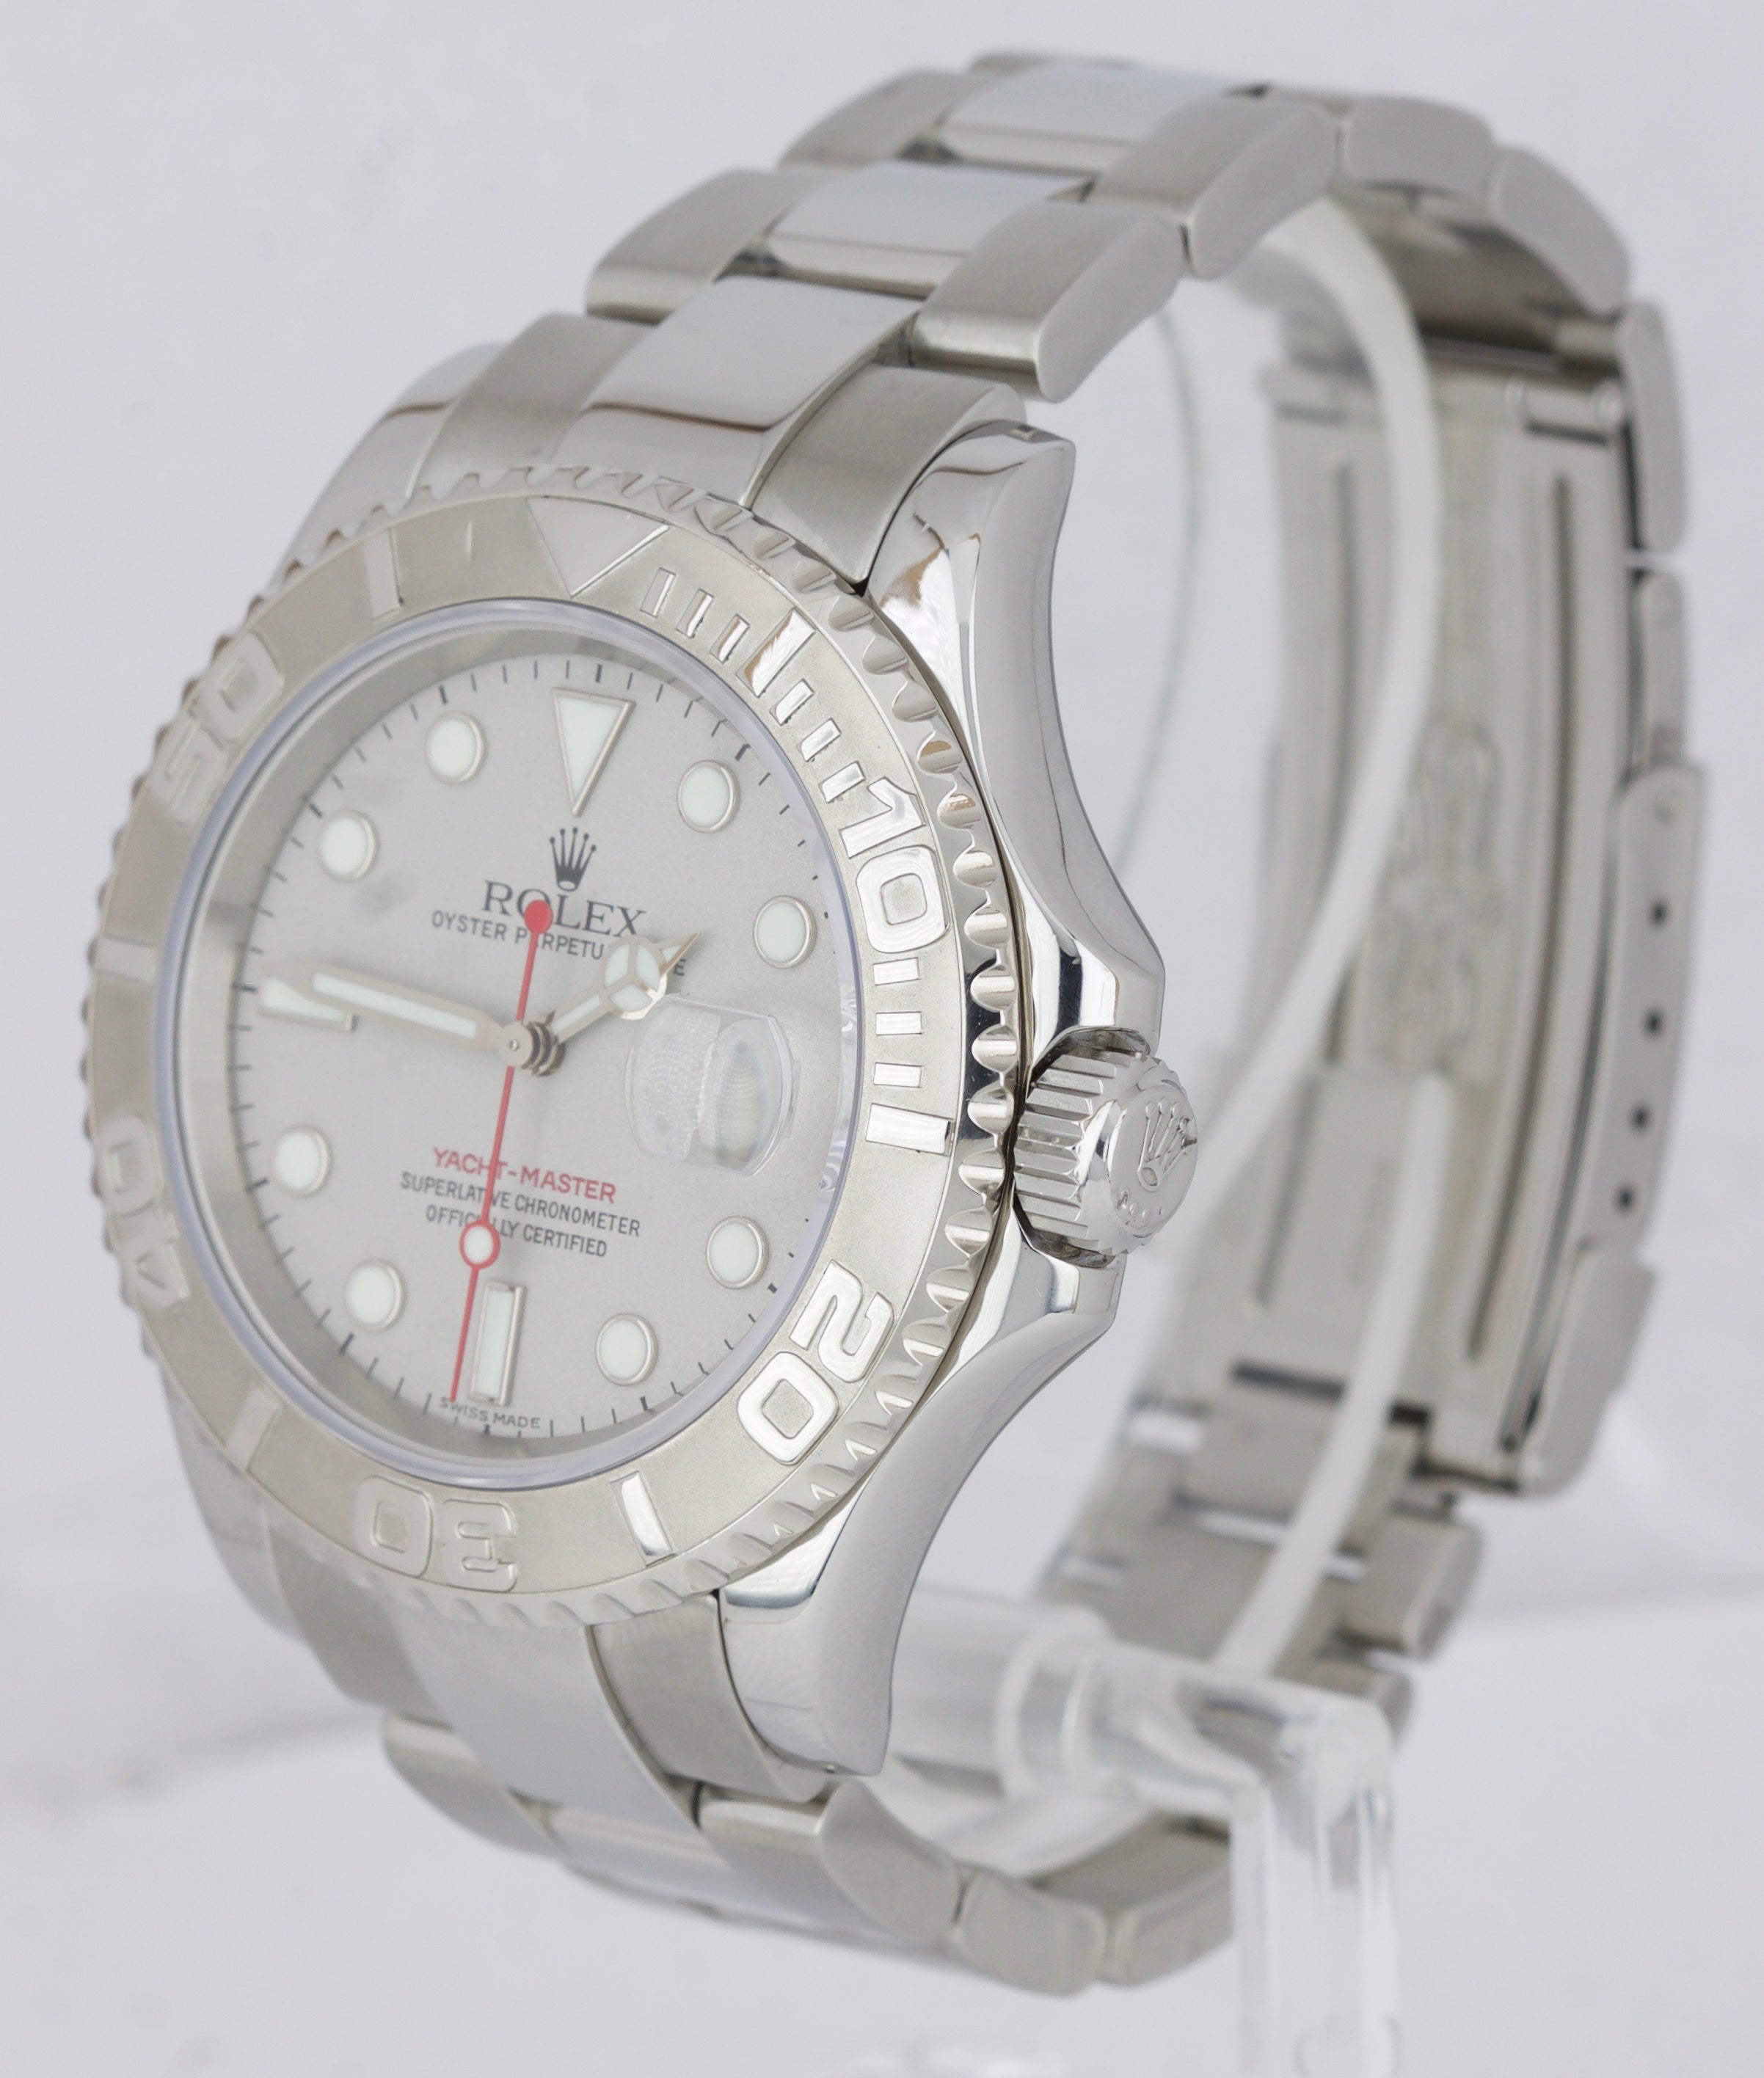 yacht master stainless steel price